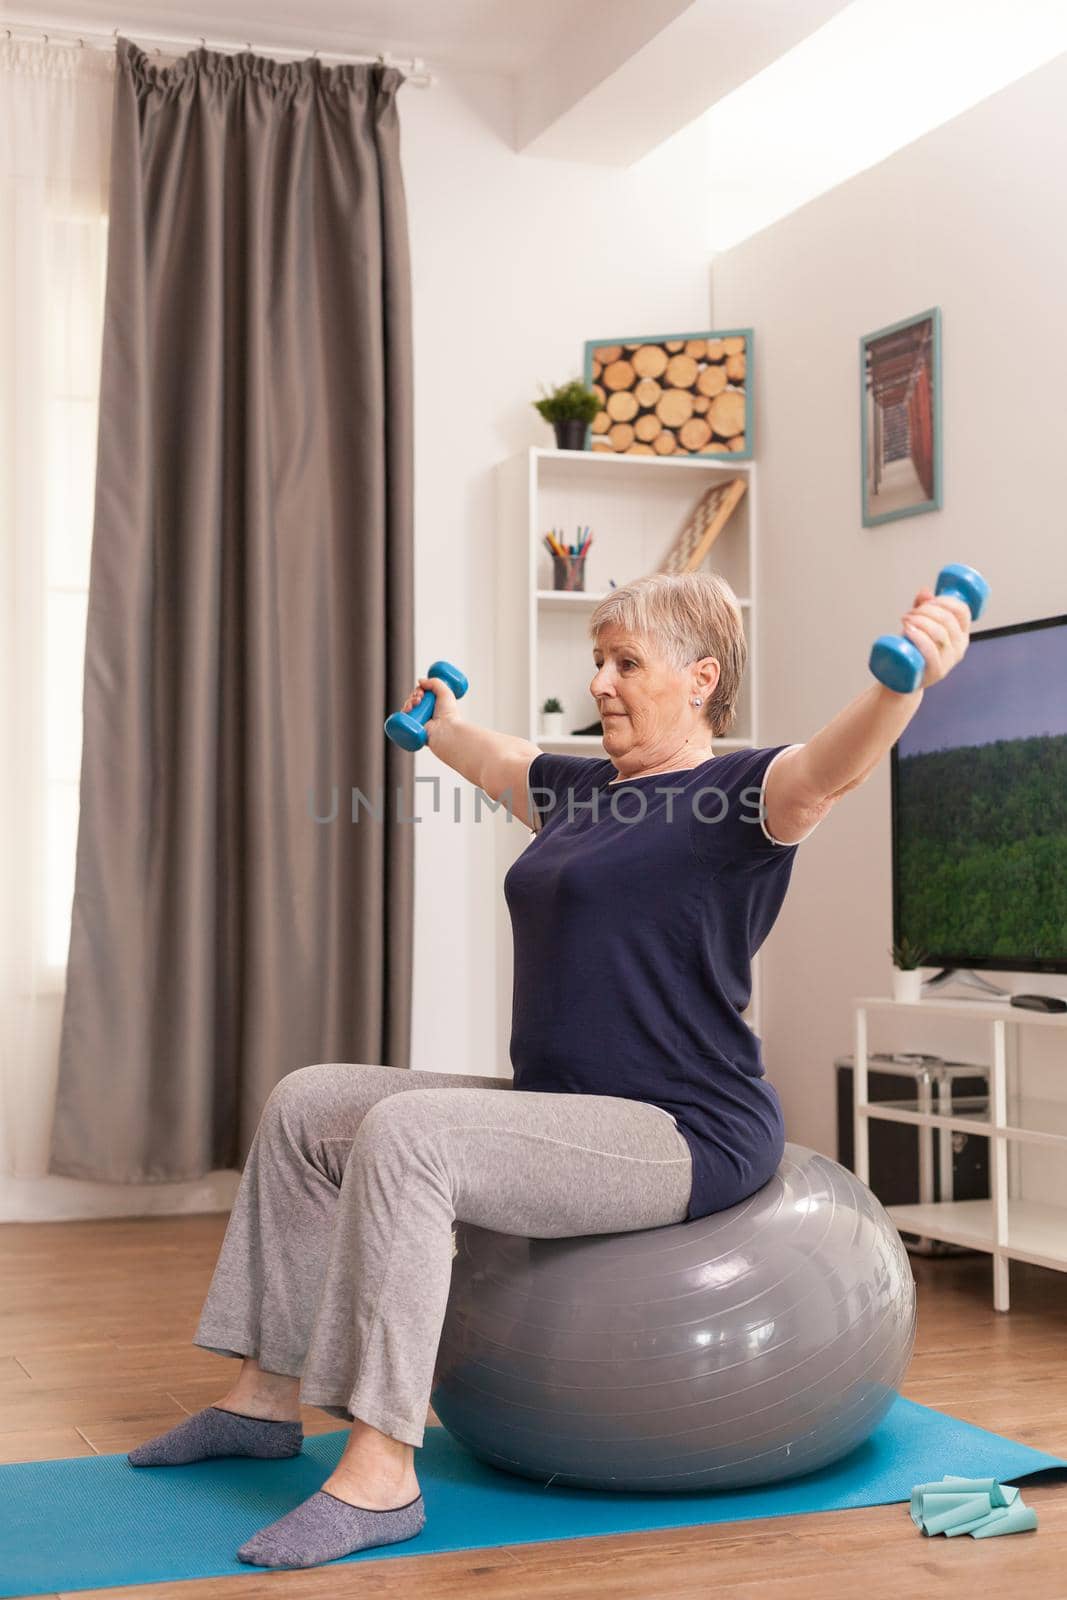 Senior woman using balance ball and dumbbells sitting on yoga mat at home. Old person pensioner online internet exercise training at home sport activity with resistance band, swiss ball at elderly retirement age